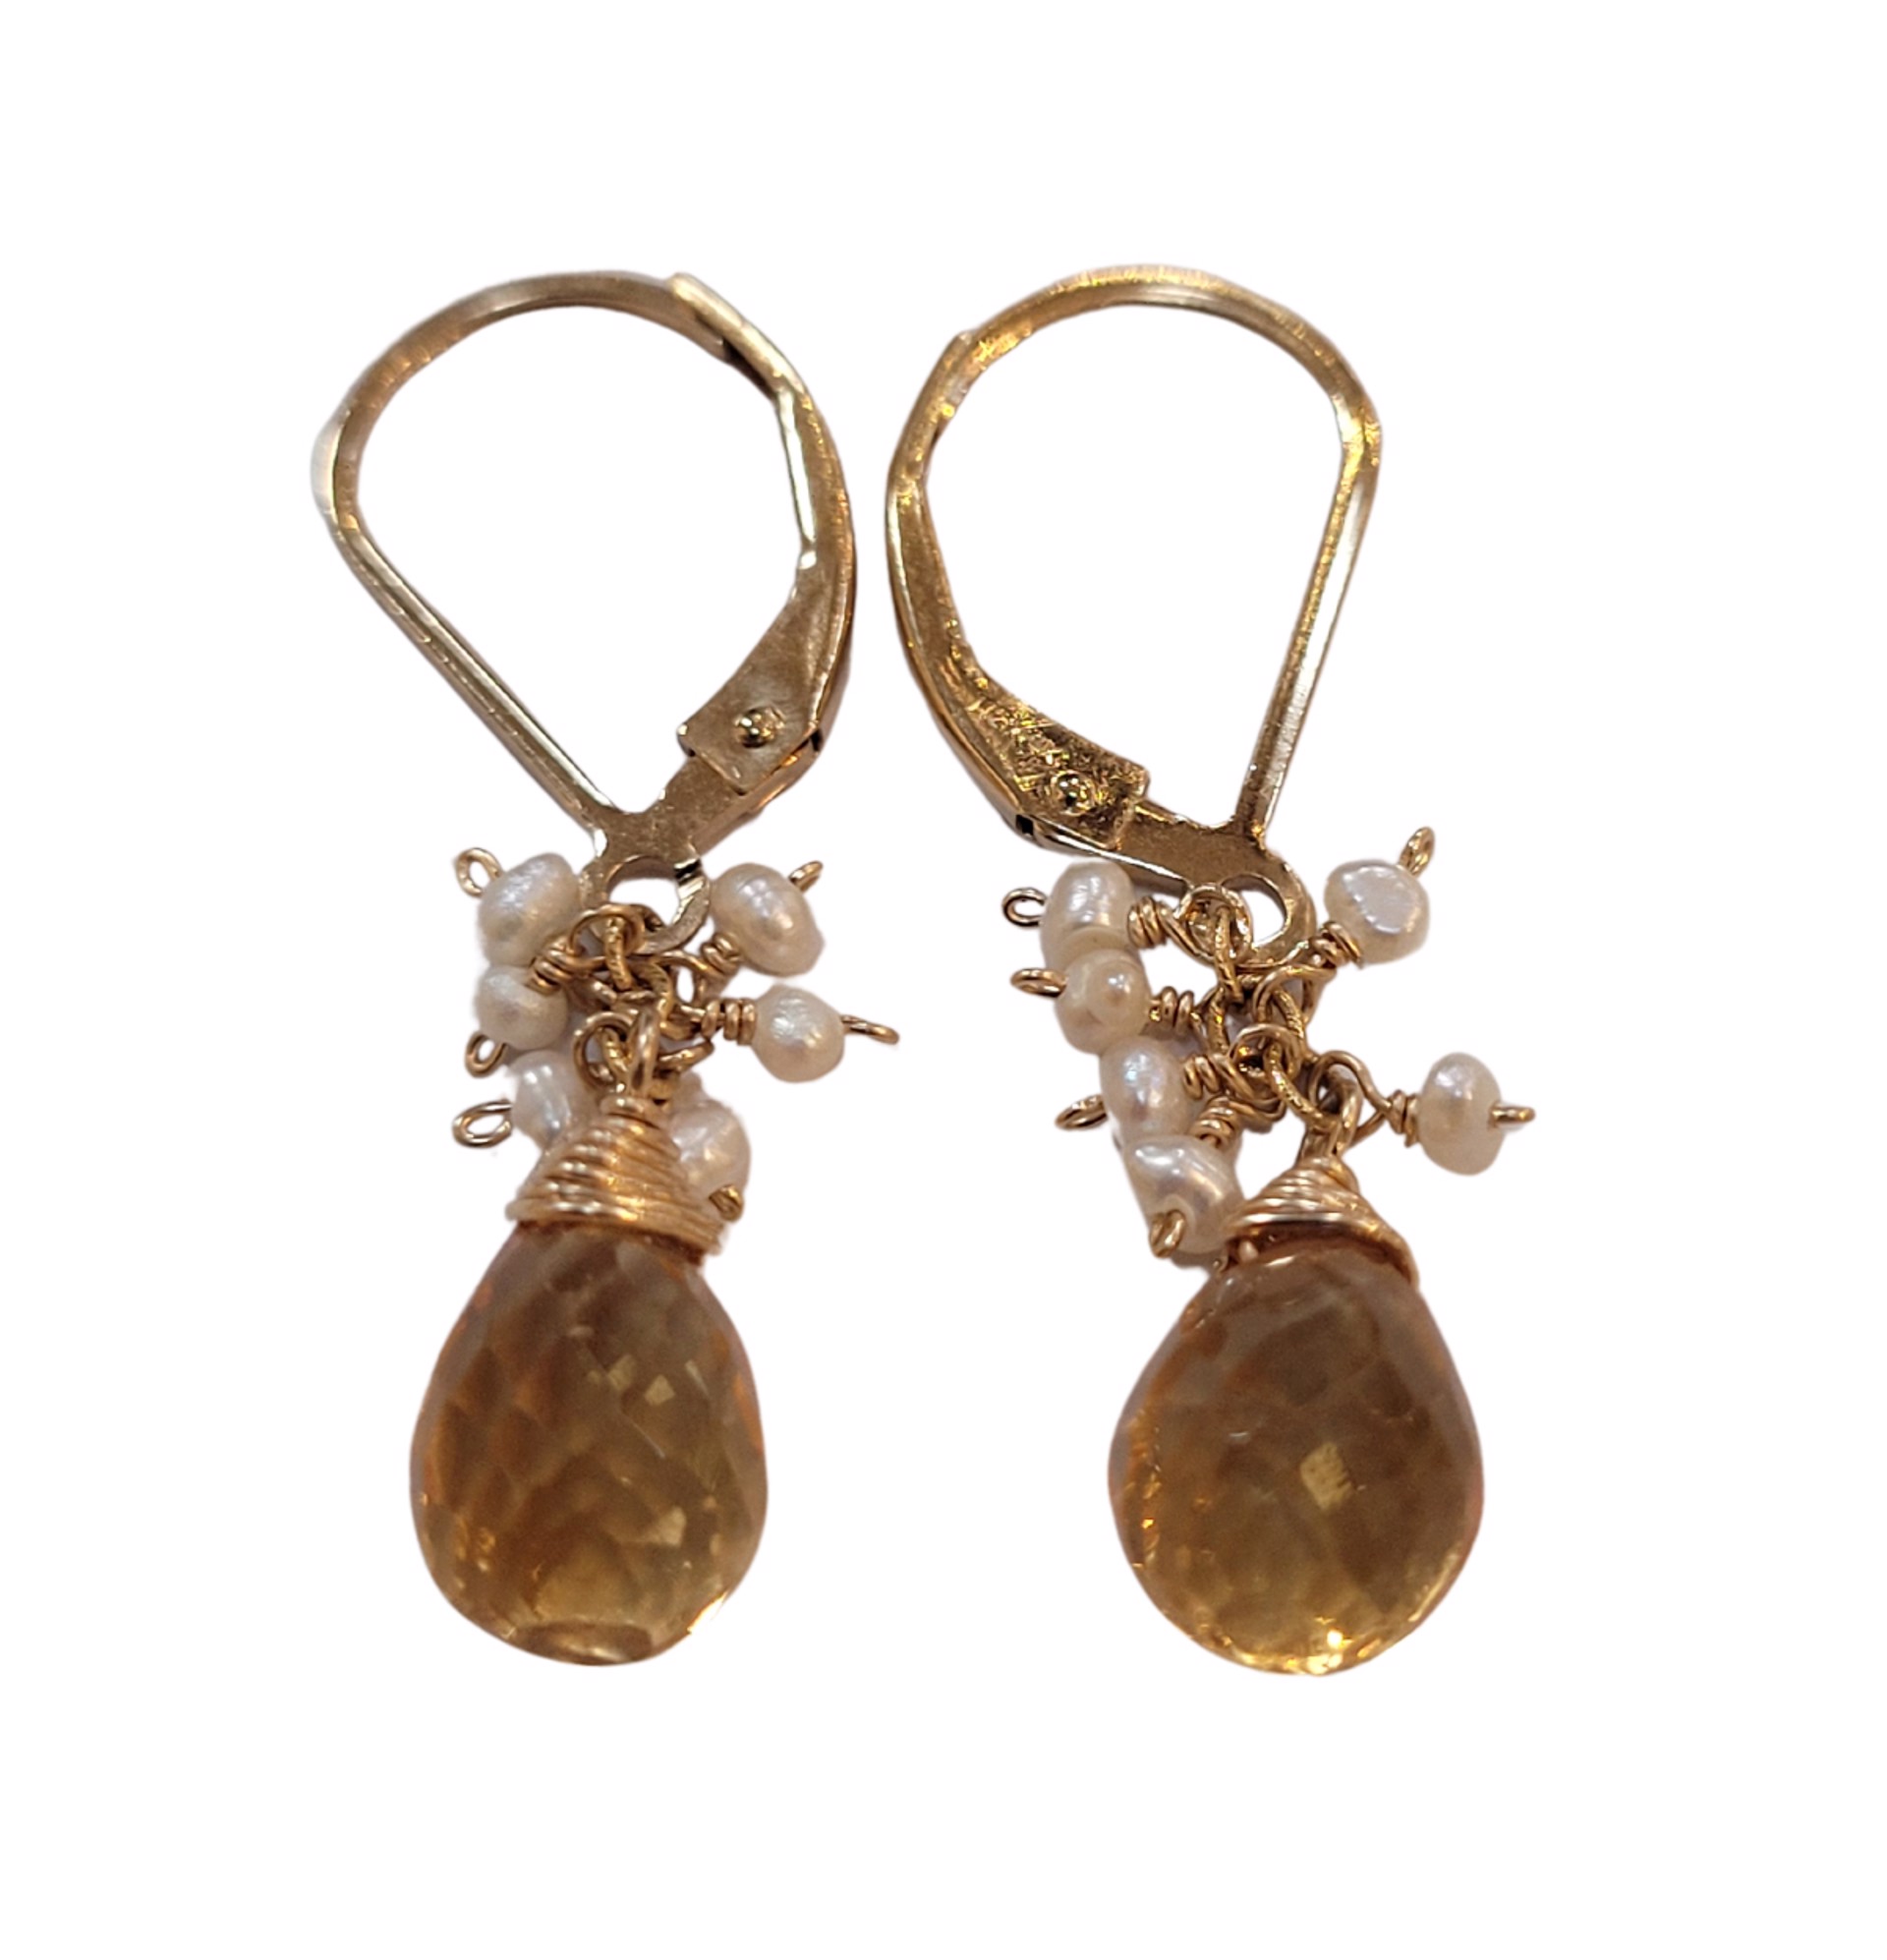 Earrings - Citrine and Freshwater Pearl Drops by Julia Balestracci